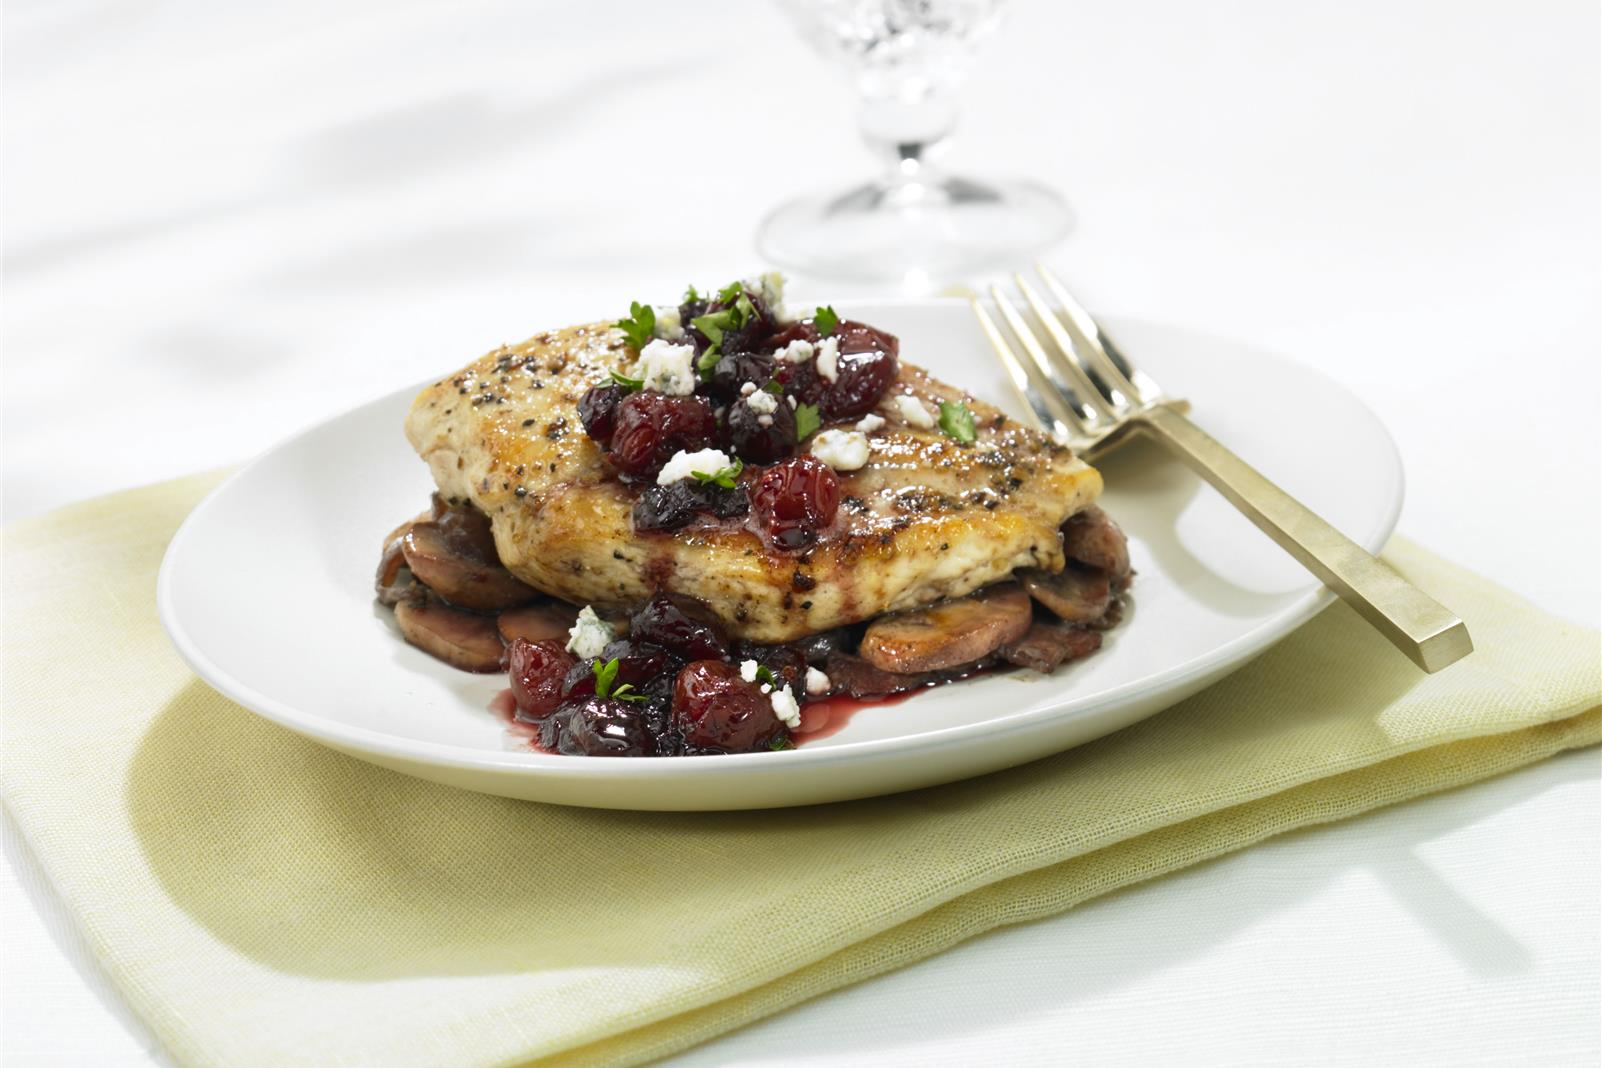 Pan Seared Chicken Breasts with Cran-Cherry Sauce and Bleu Cheese Crumbles